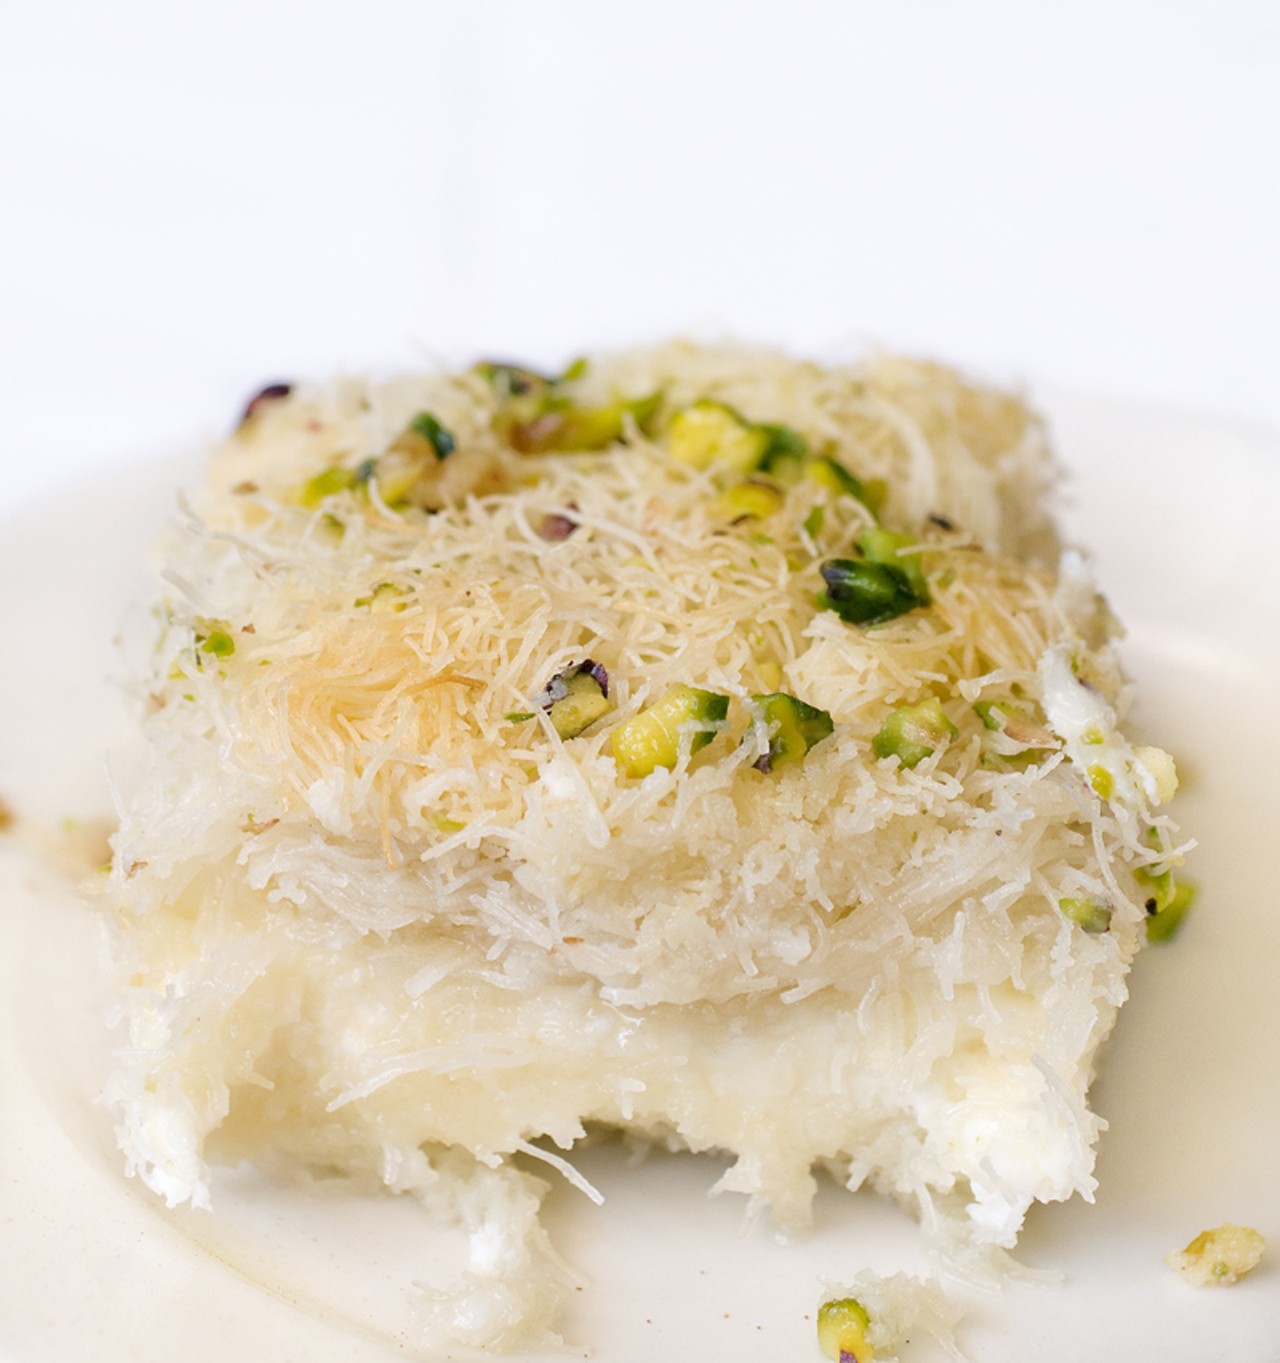 Time for dessert: Knafeh, Ranoush&rsquo;s signature dessert. A hybrid of baklava and cheesecake &ndash; sweet soft cheese sandwiched between layer&rsquo;s of bird&rsquo;s nest phyllo topped with pistachio nuts.